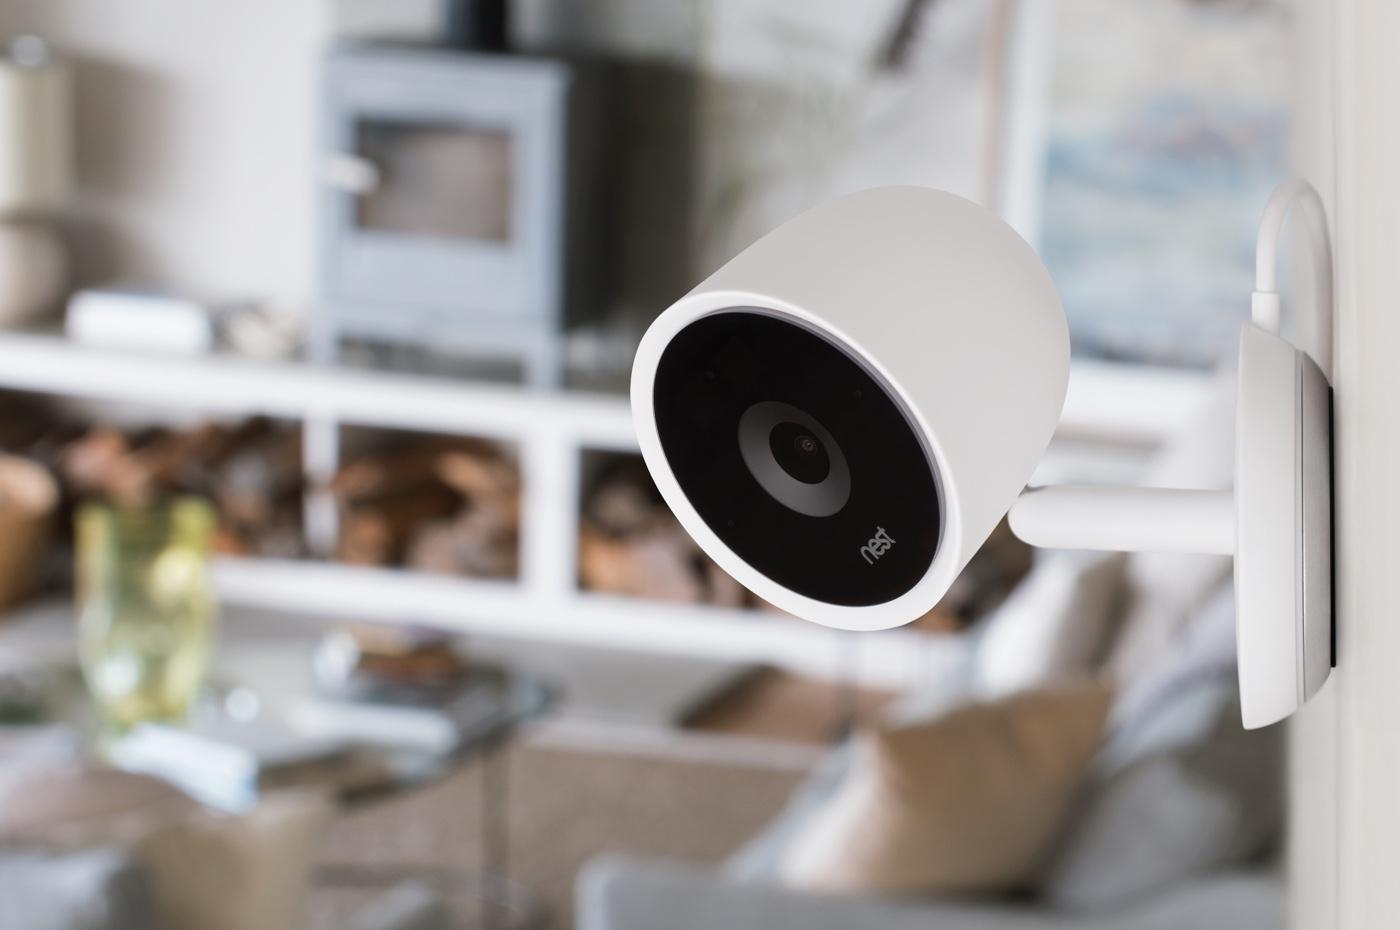 Nest Cam IQ owners are getting a free 